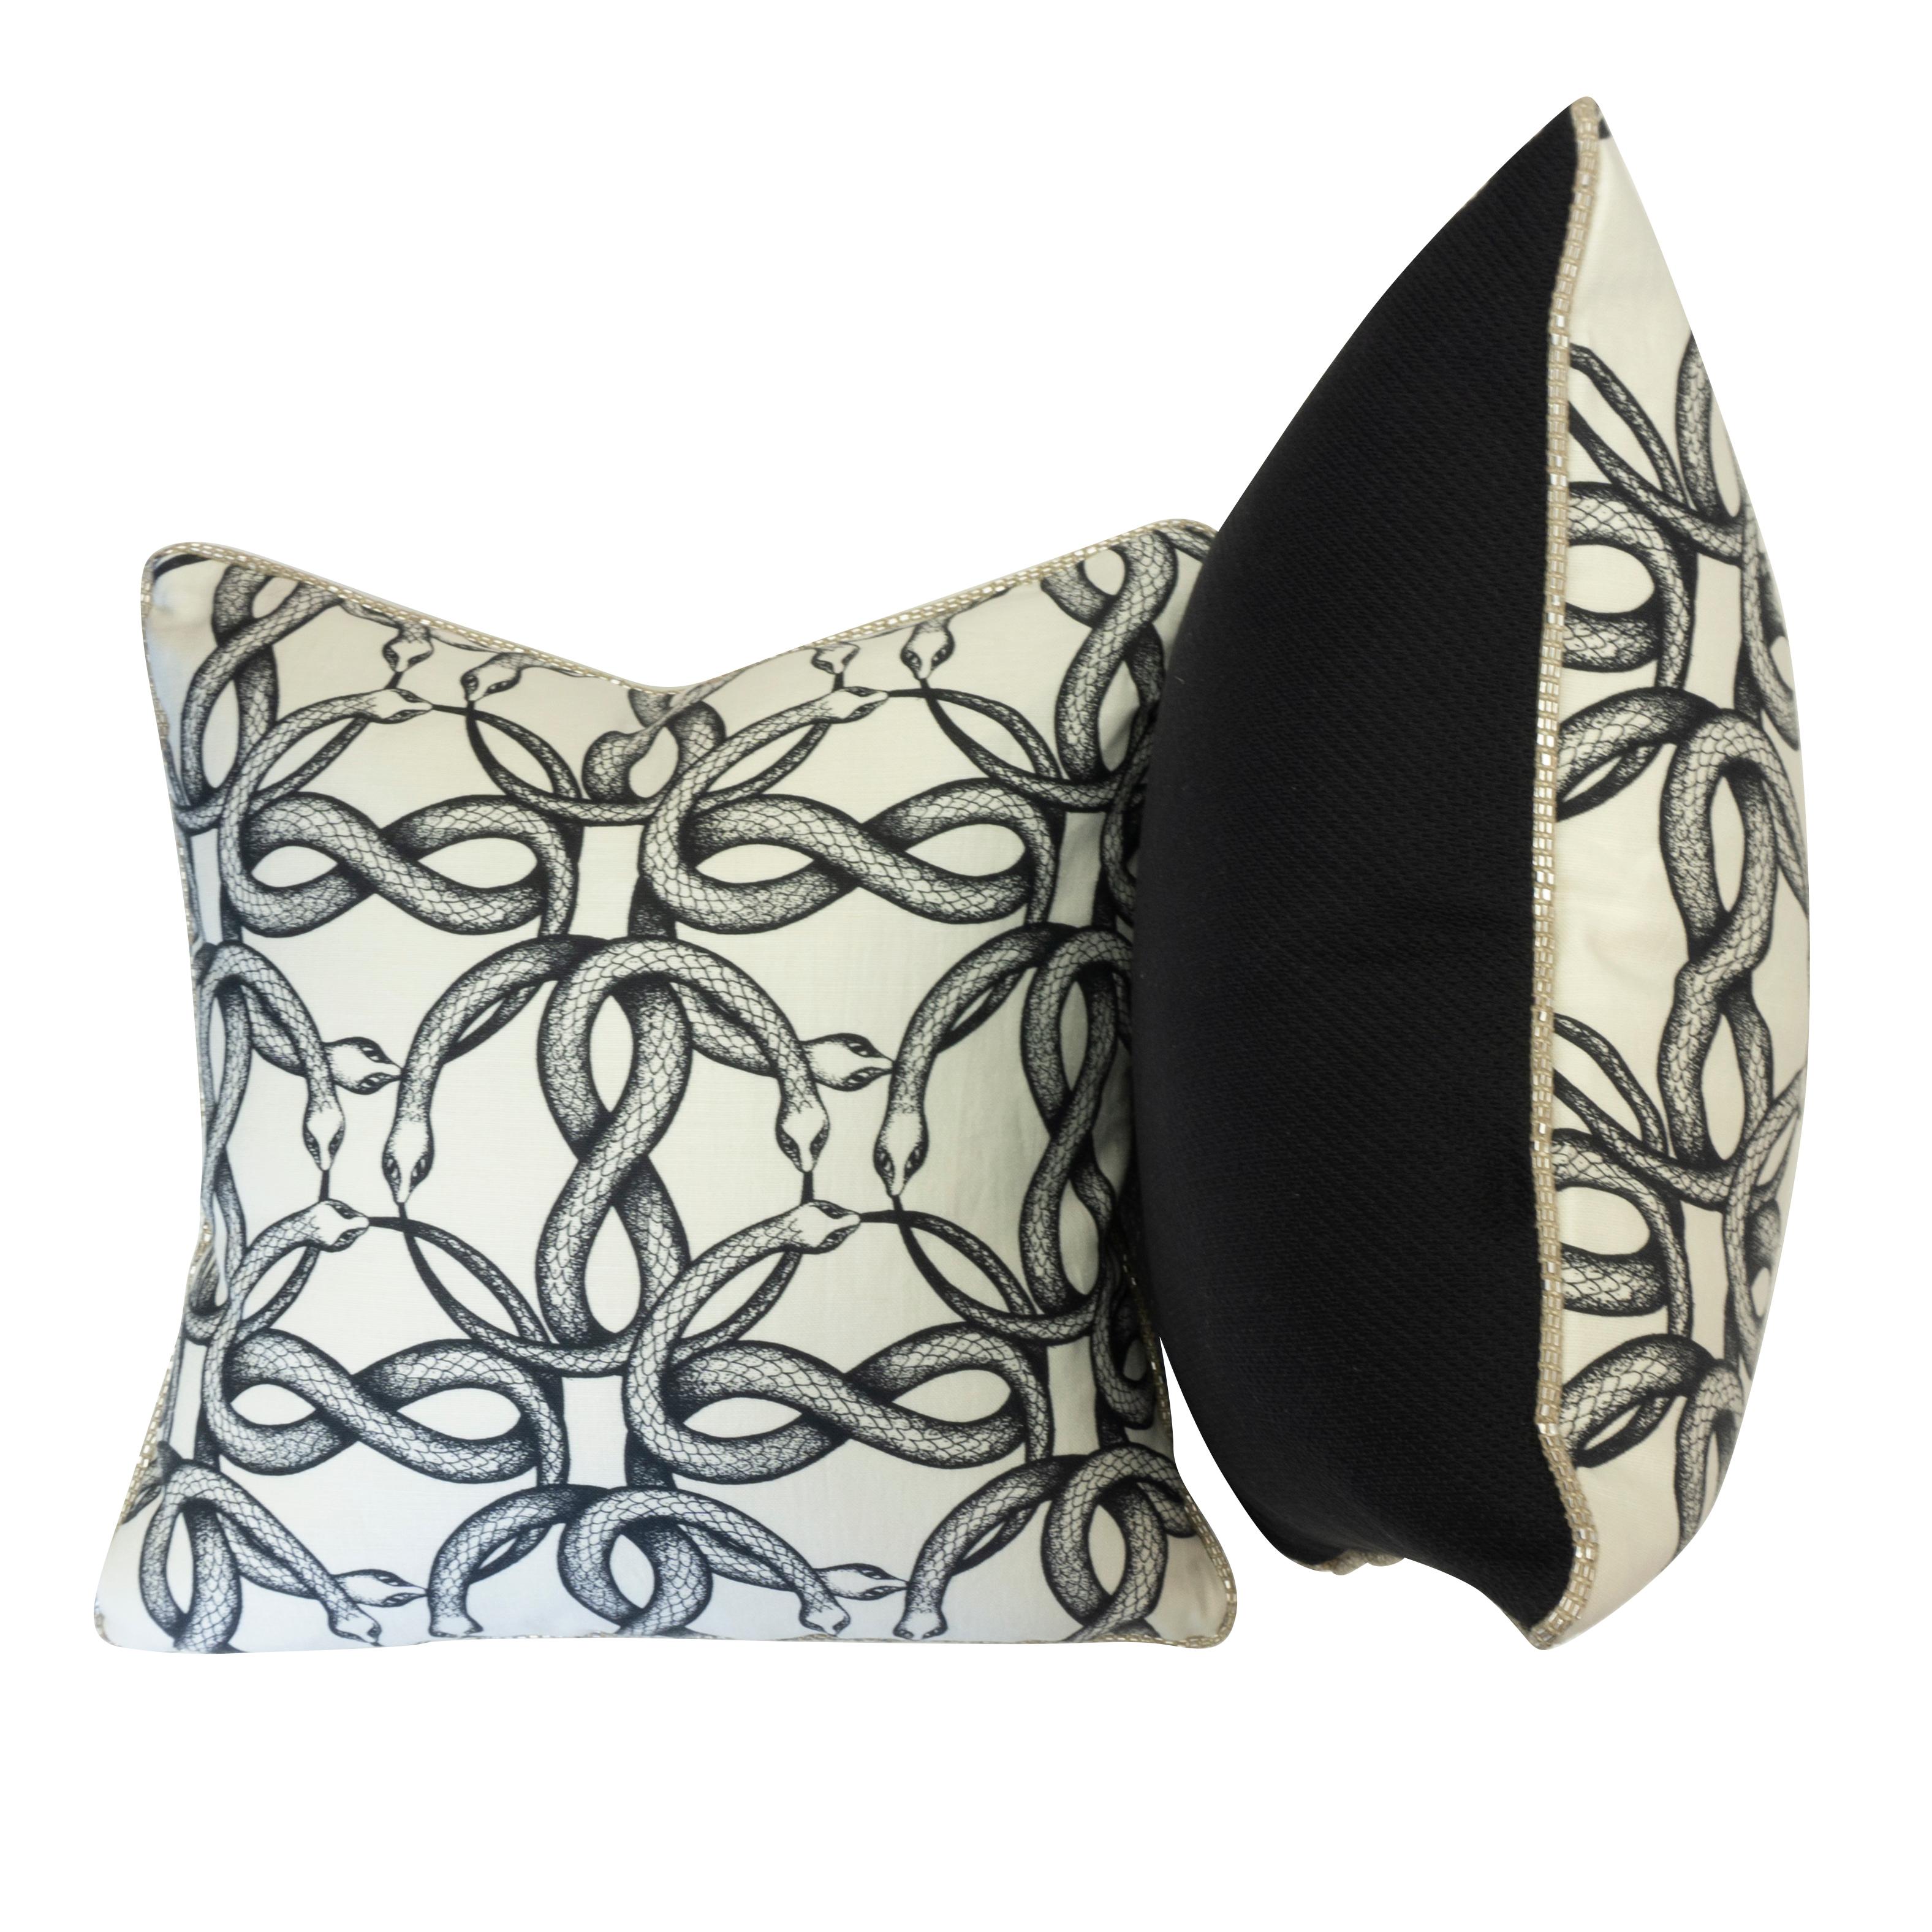 A pair of square throw pillows made with Pierre Frey’s Ouroboros fabric which depicts a printed snake pattern; inspired by the Greek eternal cycle symbol. Completed with a solid black cotton backing and a special woven metallic piping for the